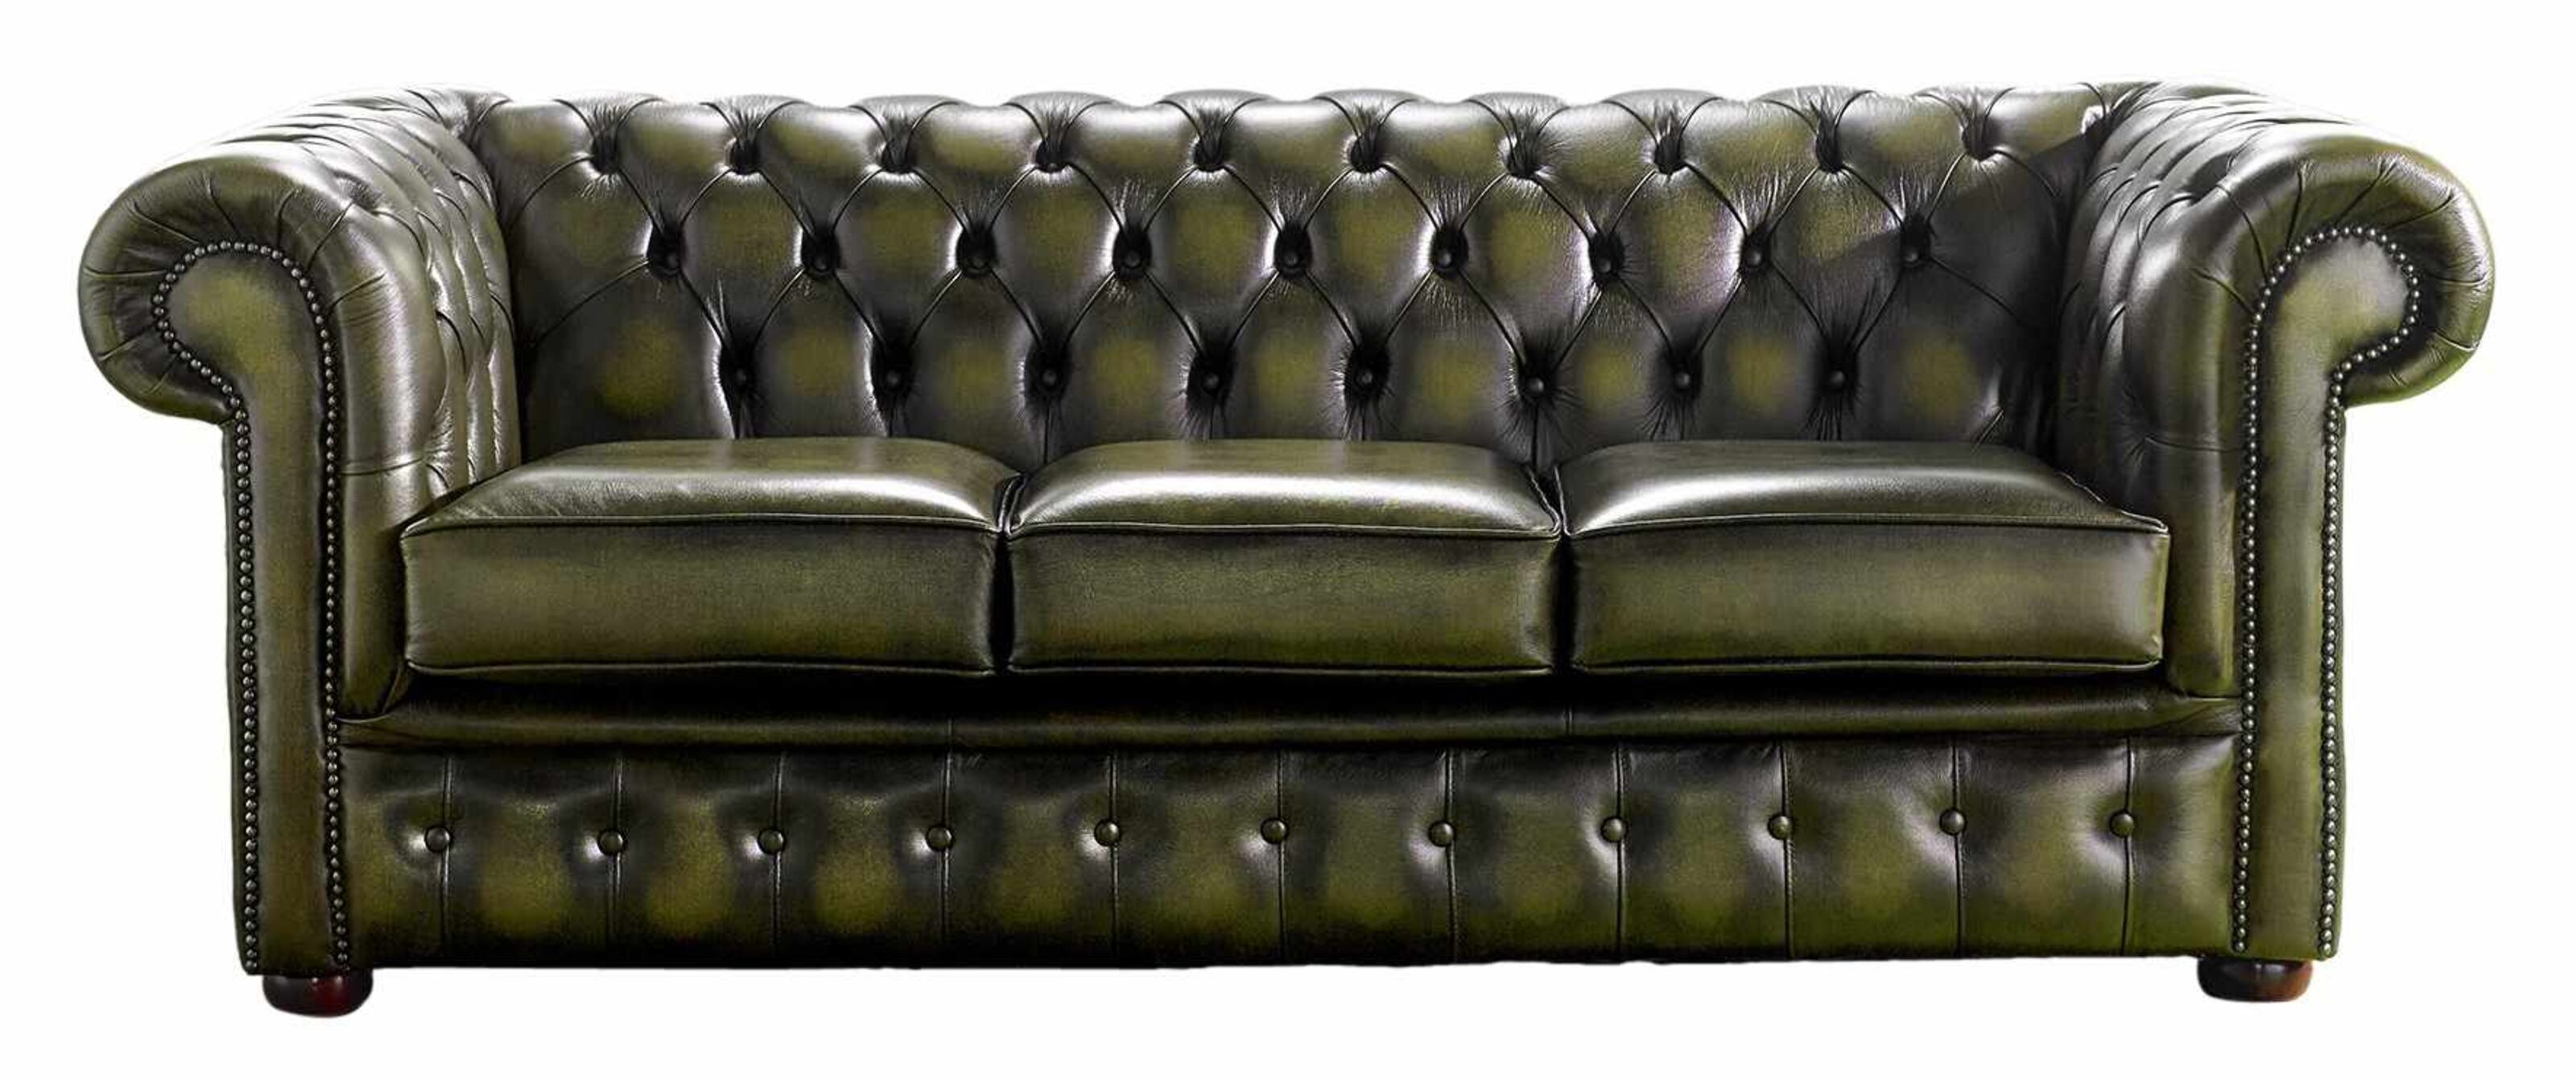 Embracing Excellence The Quality and Appeal of Chesterfield Sofas  %Post Title